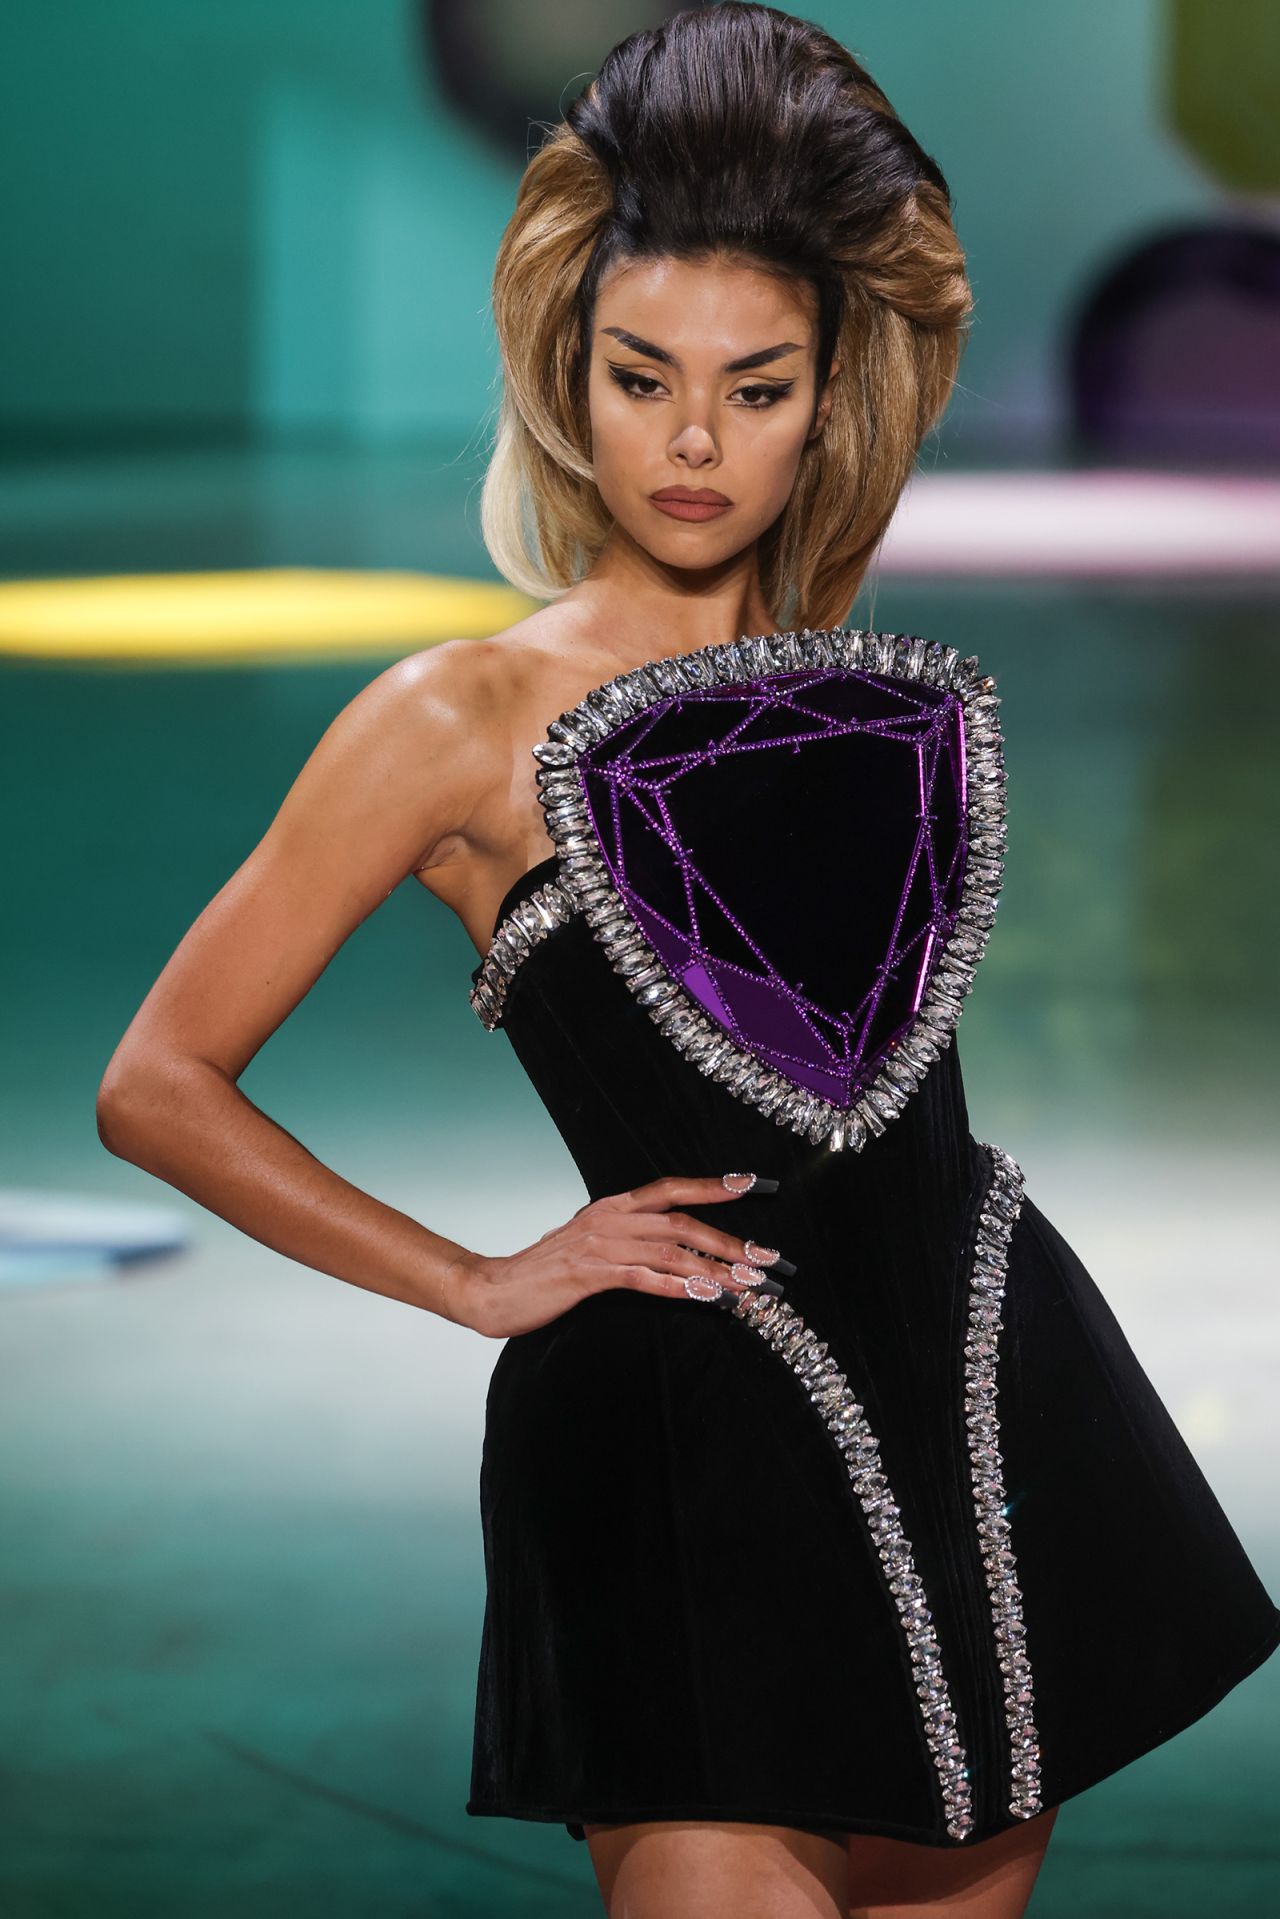 The Blonds collection was inspired by old Hollywood glamour.